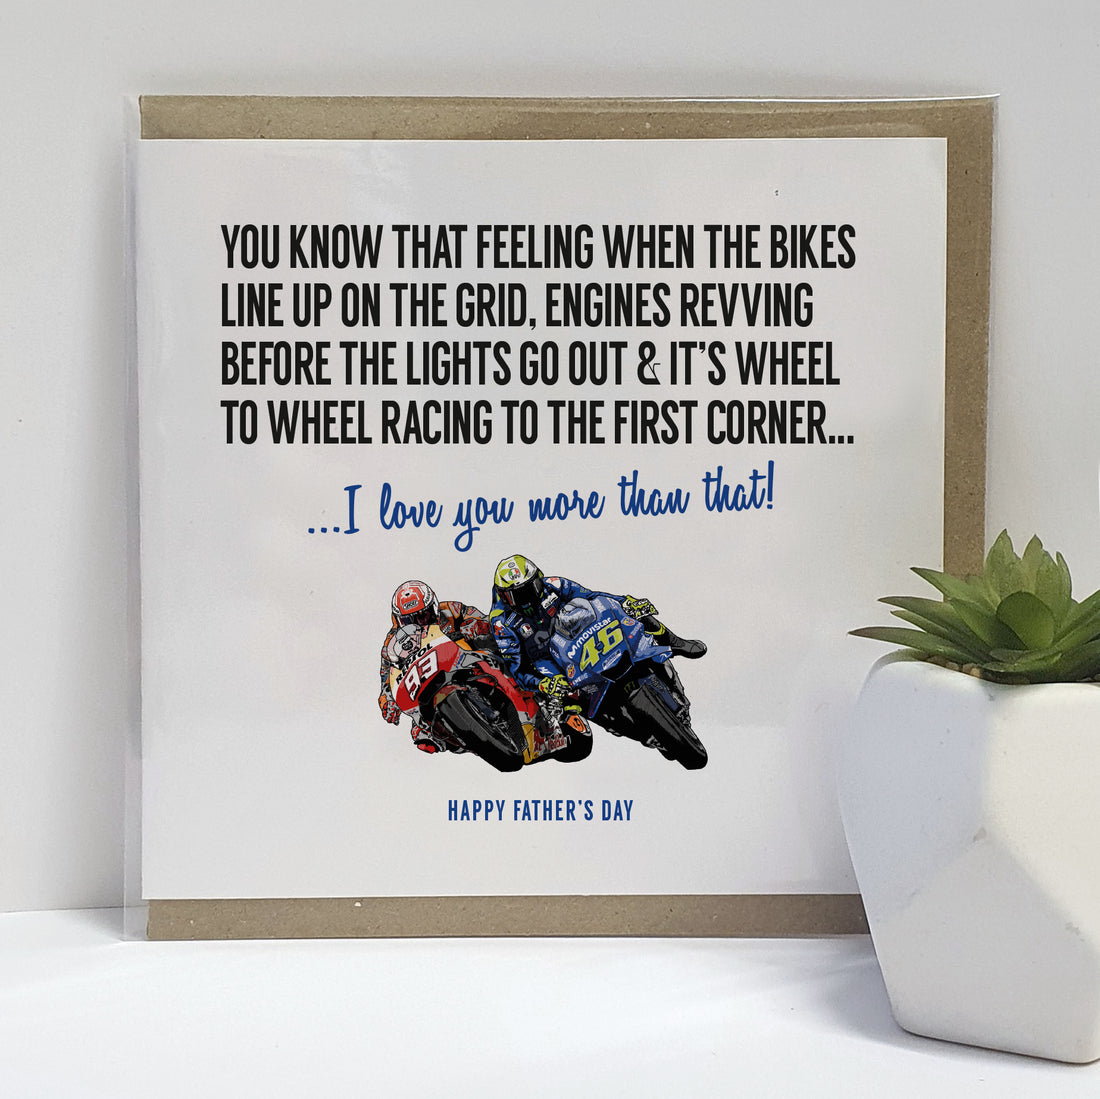 Father's Day greeting card by Local Lingo featuring a hand-drawn illustration of MotoGP legends Valentino Rossi and Marc Marquez racing to the first corner, with the text "I love you more than that!", designed on high-quality card stock.